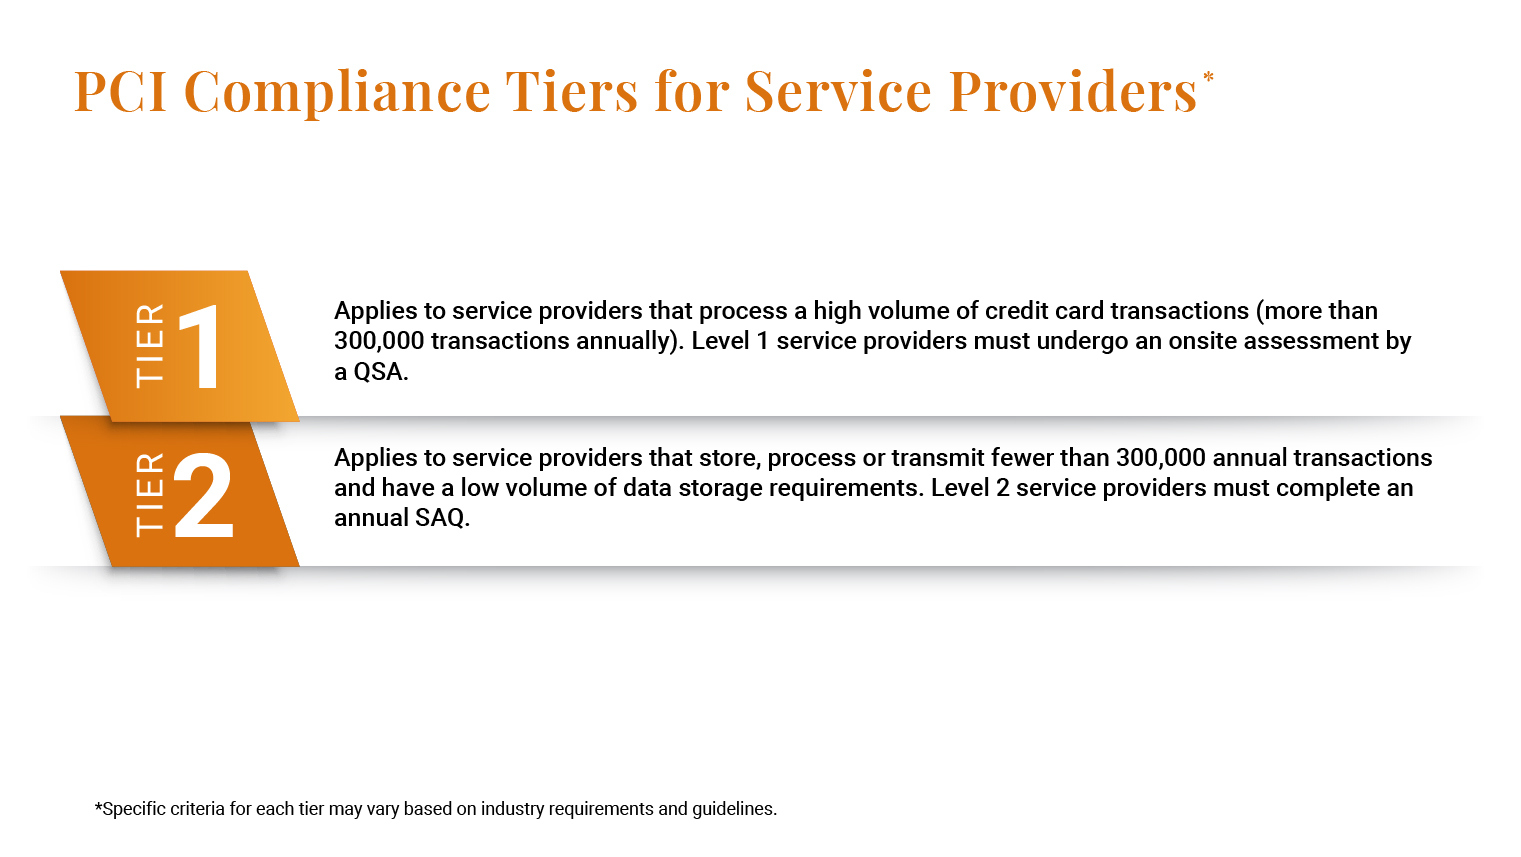 PCI Compliance Tiers for Service Providers